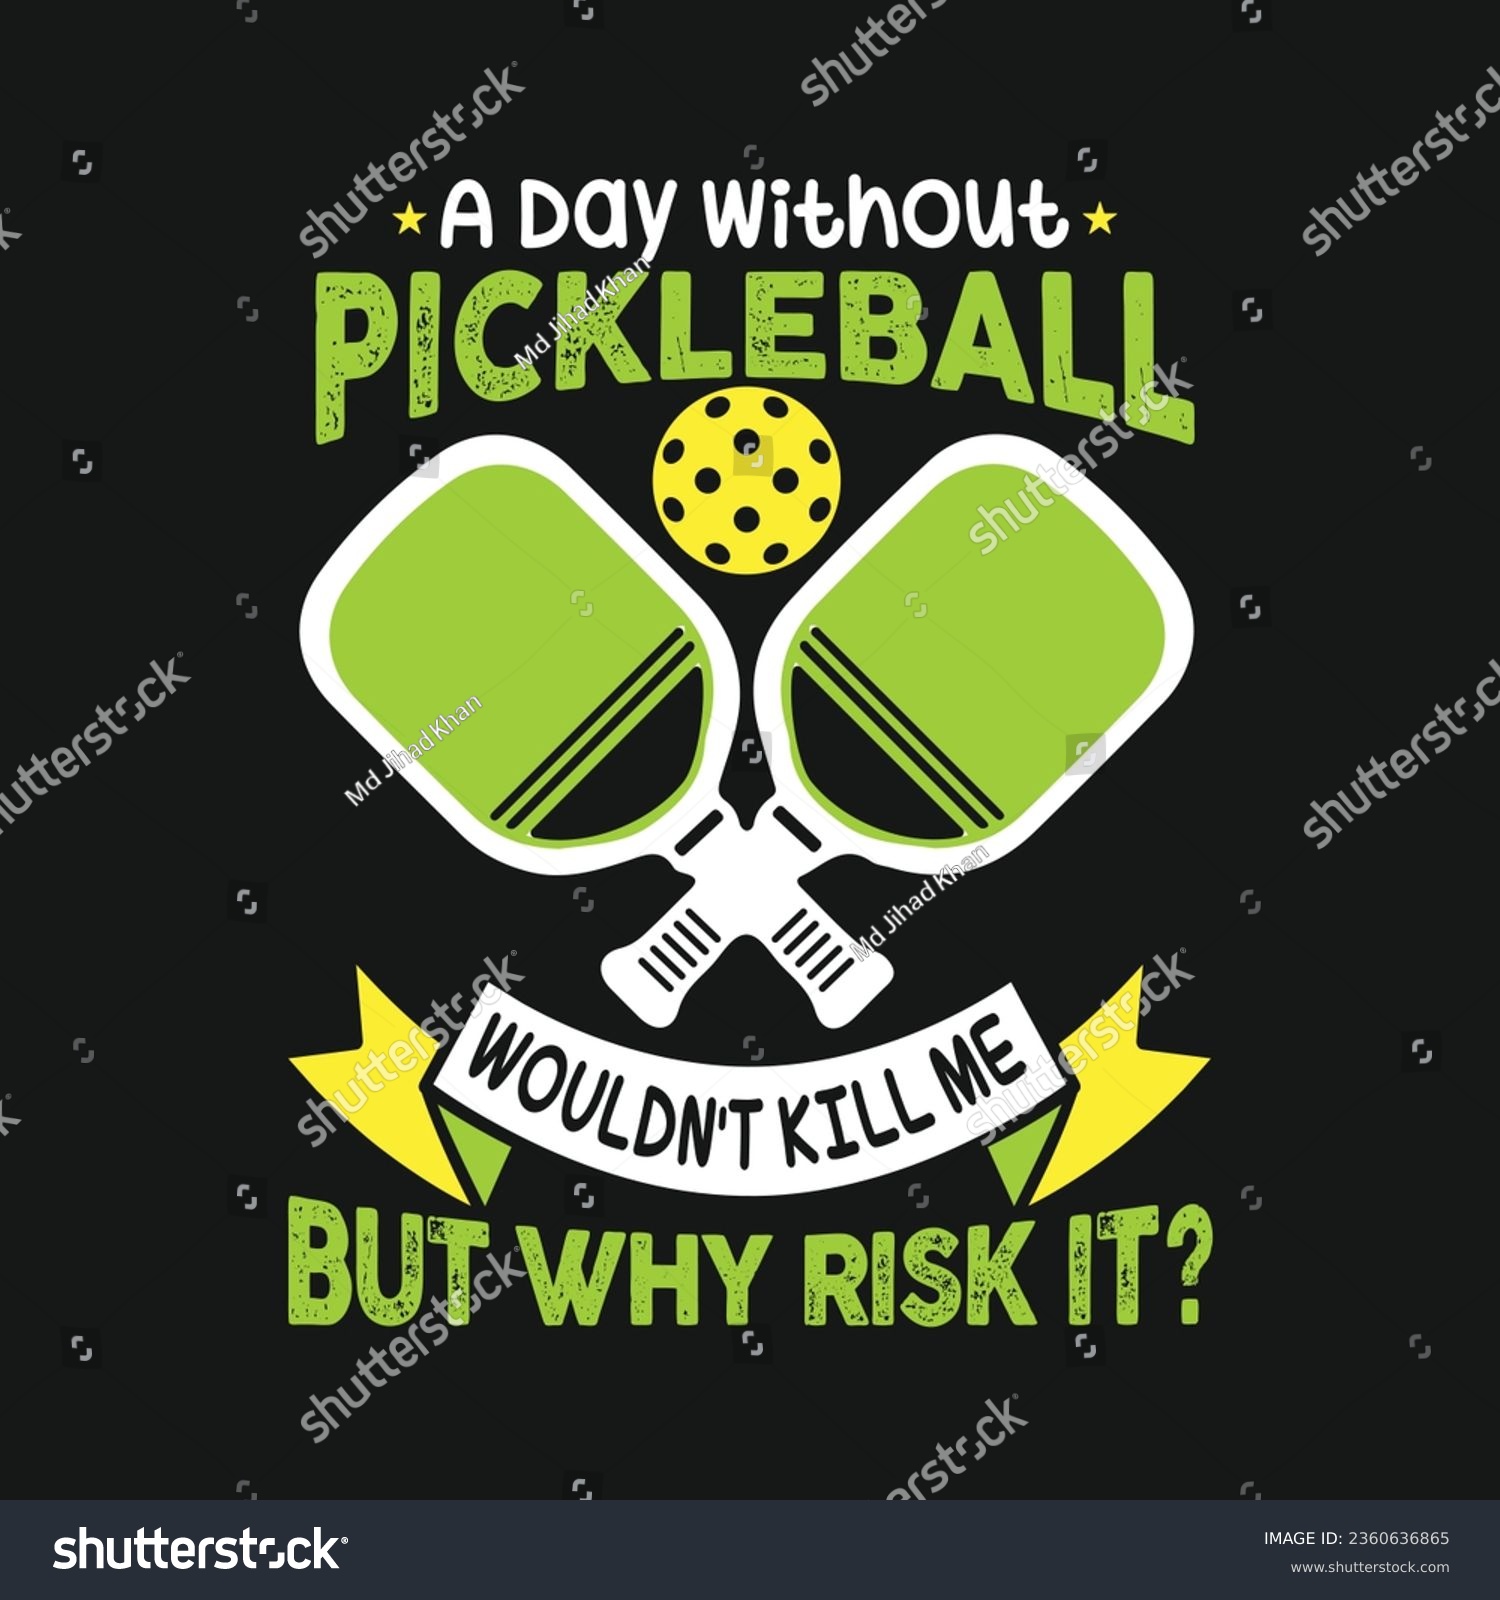 SVG of A Day Without Pickleball Wouldn't Kill Me But Why Risk It. Pickball T-Shirt Design, Posters, Greeting Cards, Textiles, and Sticker Vector Illustration	
 svg